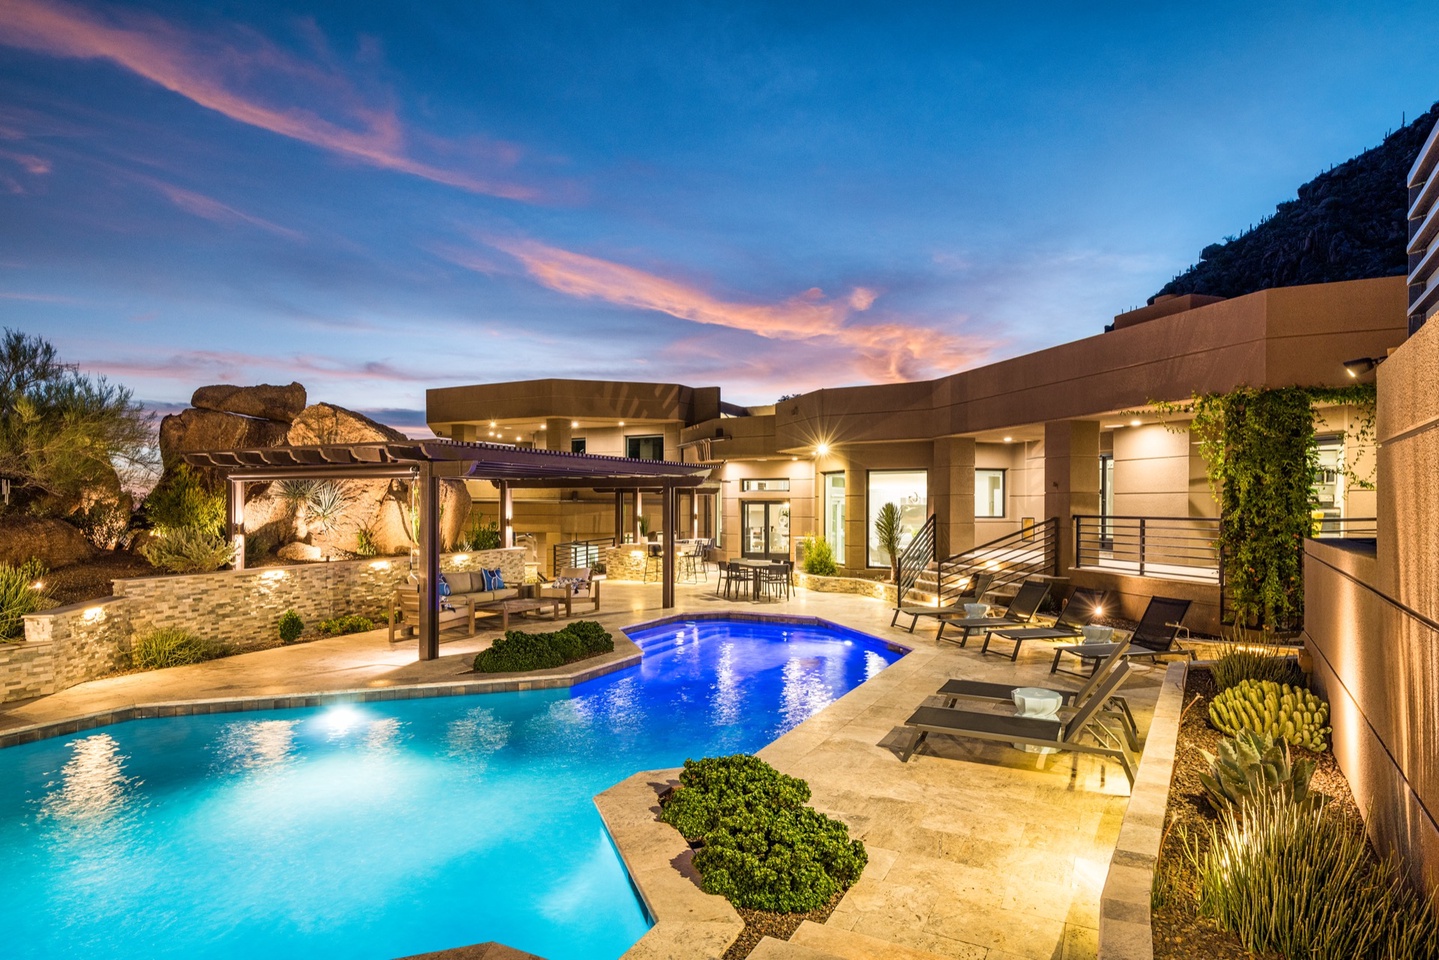 Take in the mesmerizing AZ sunsets at this elevated villa